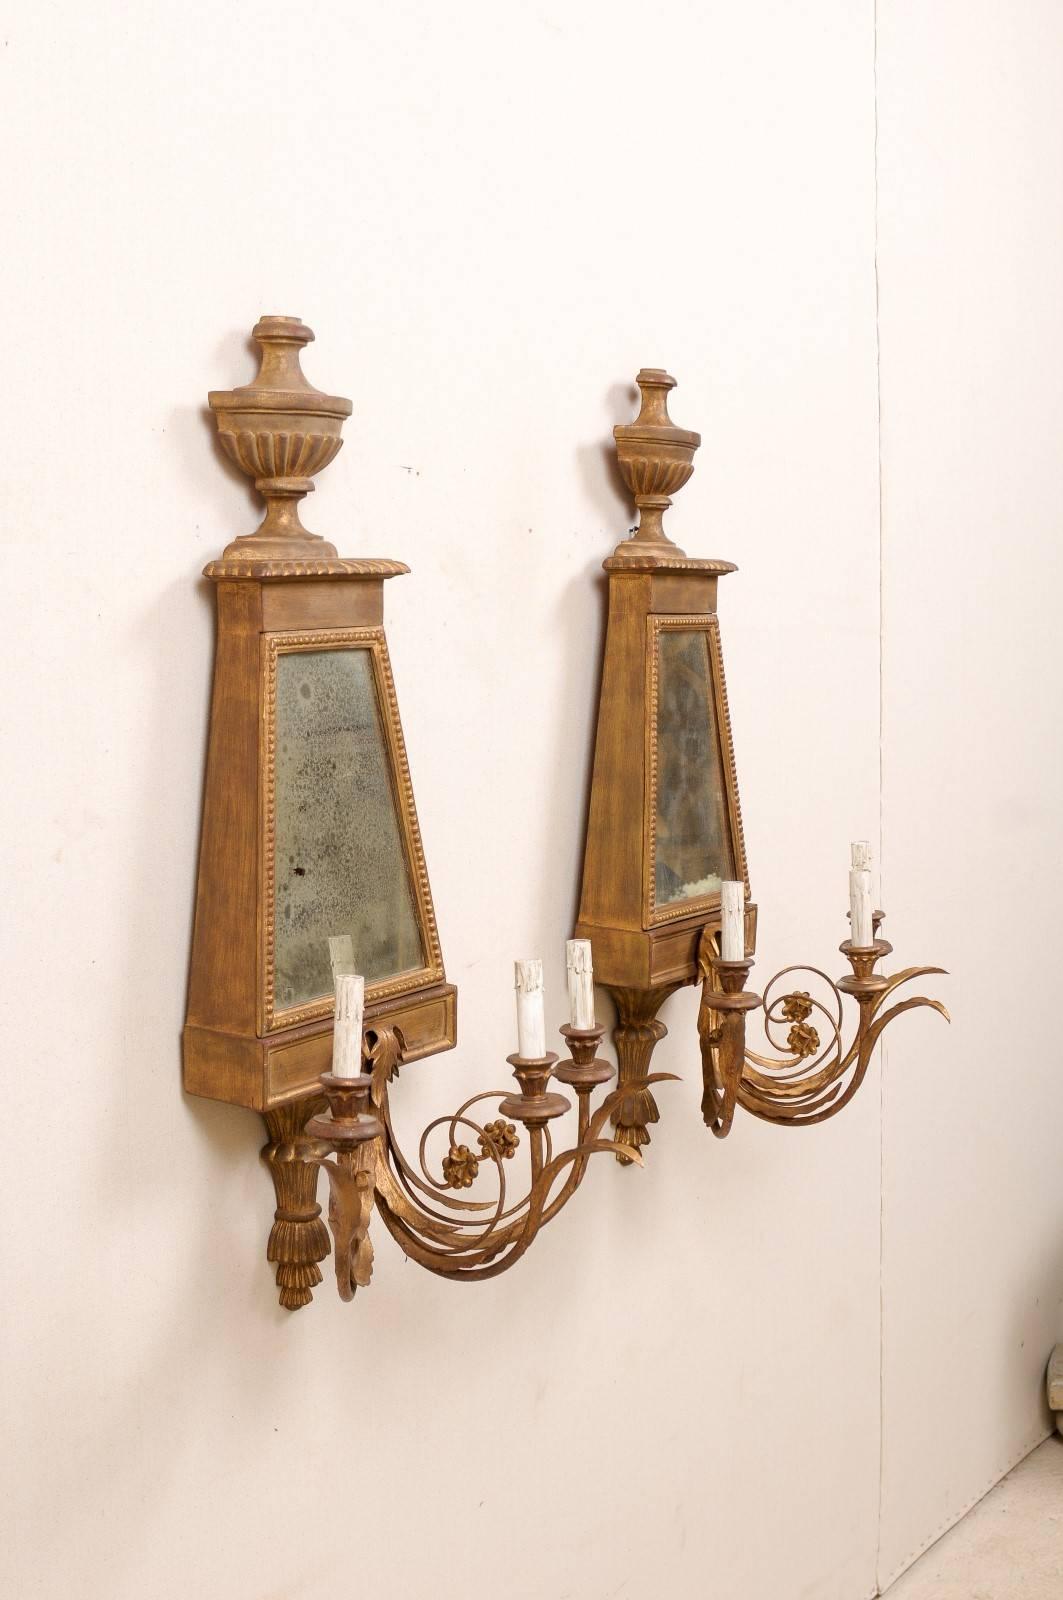 Painted Pair of Italian Mirrored Sconces Made of Wood and Metal in Gold/Bronze Color